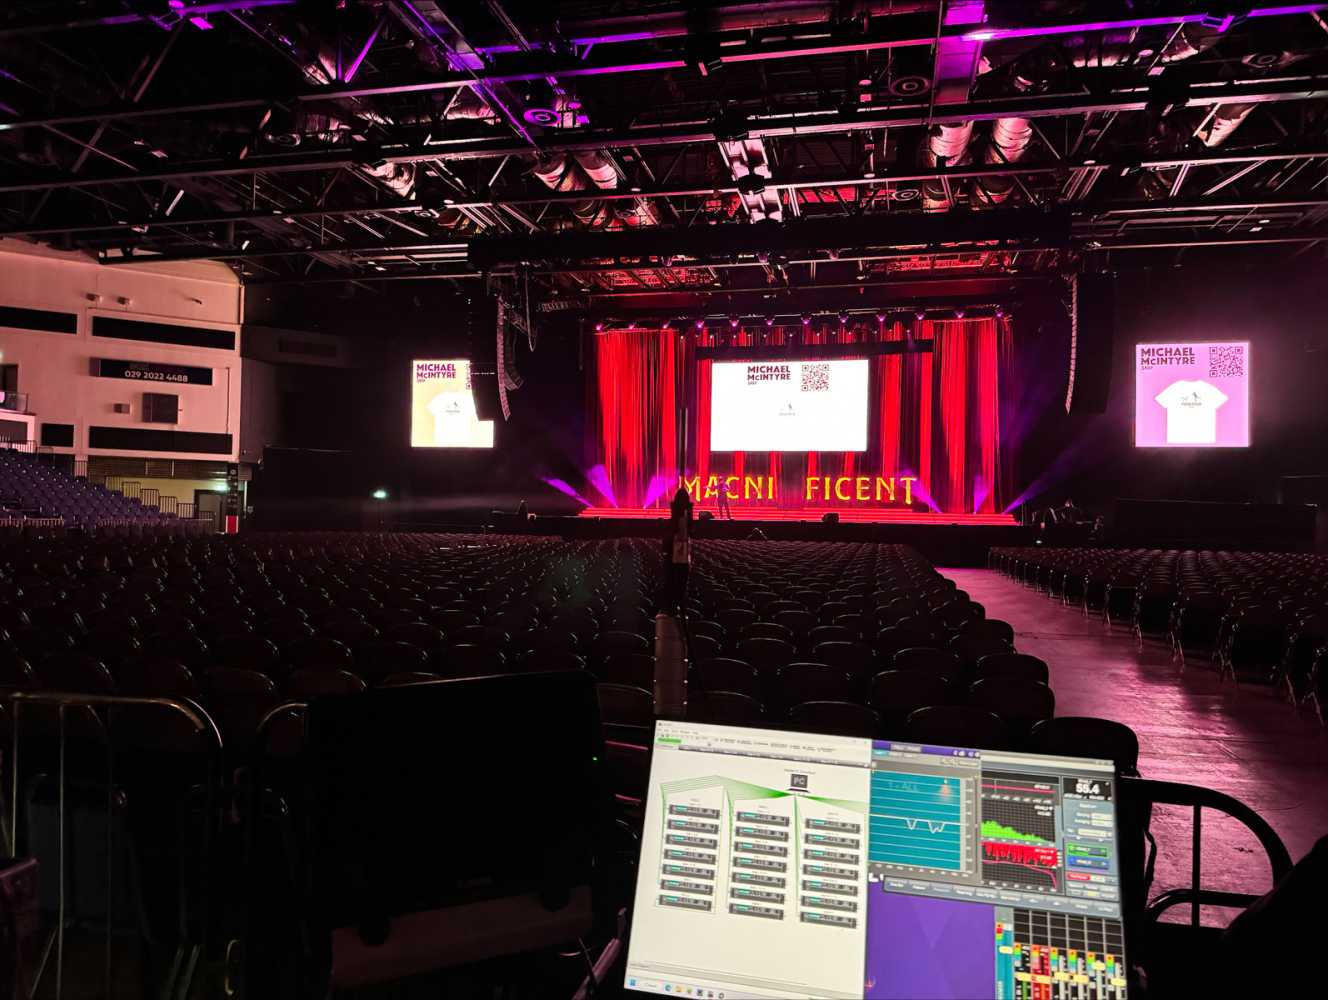 Solotech UK has again been entrusted with providing sound reinforcement for the tour